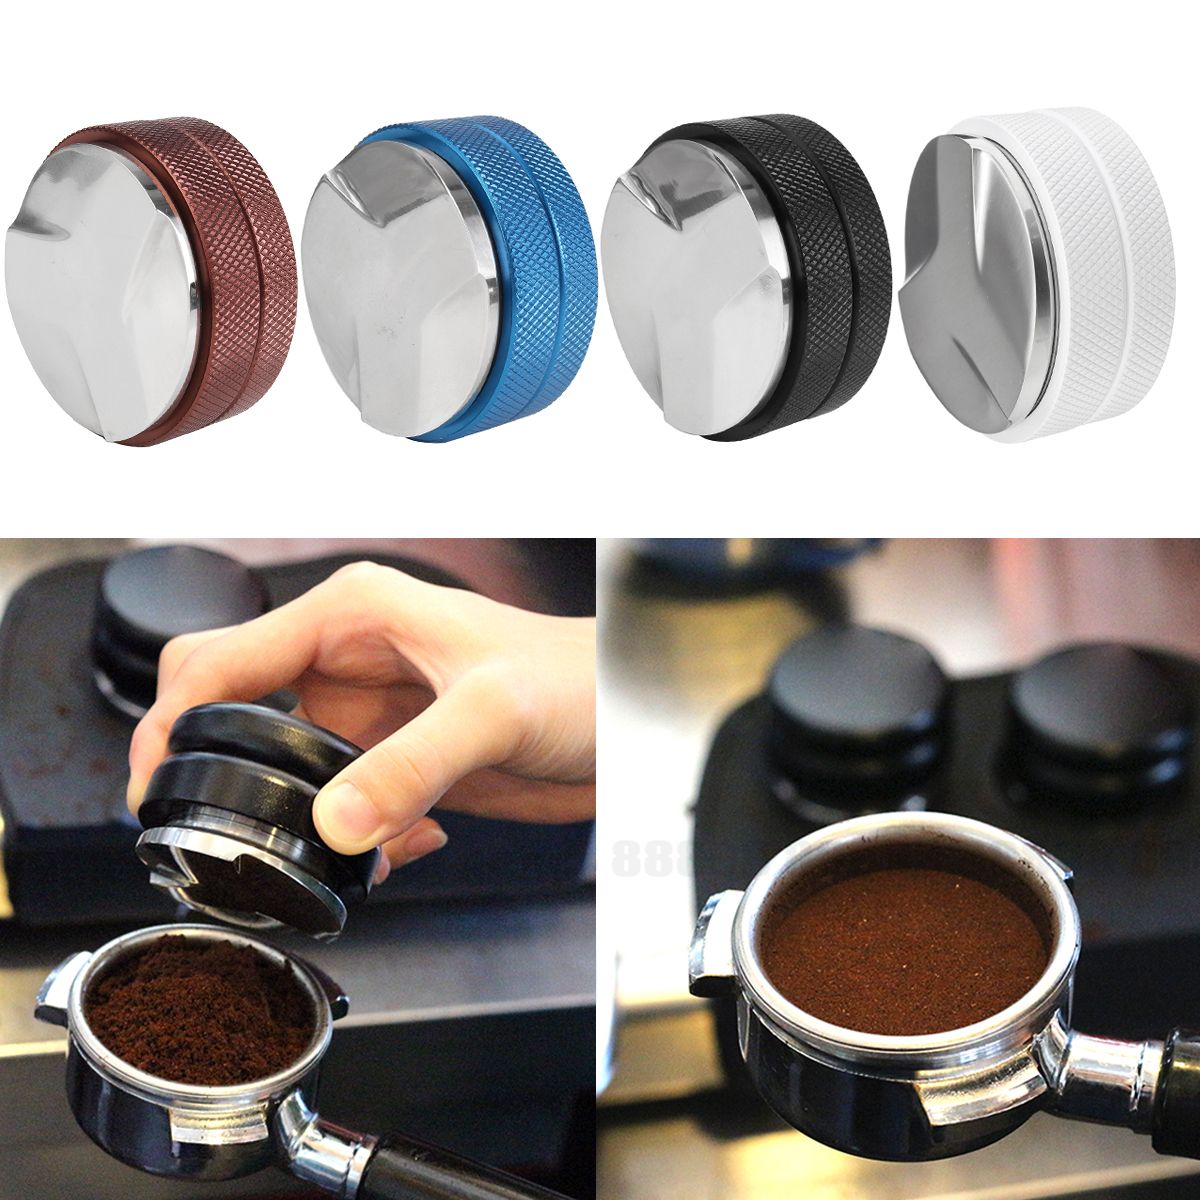 58mm-Adjustable-Palm-Coffee-Tamper-Stainless-Steel-Three-Angle-Slopes-Base-4-Colors-1169702